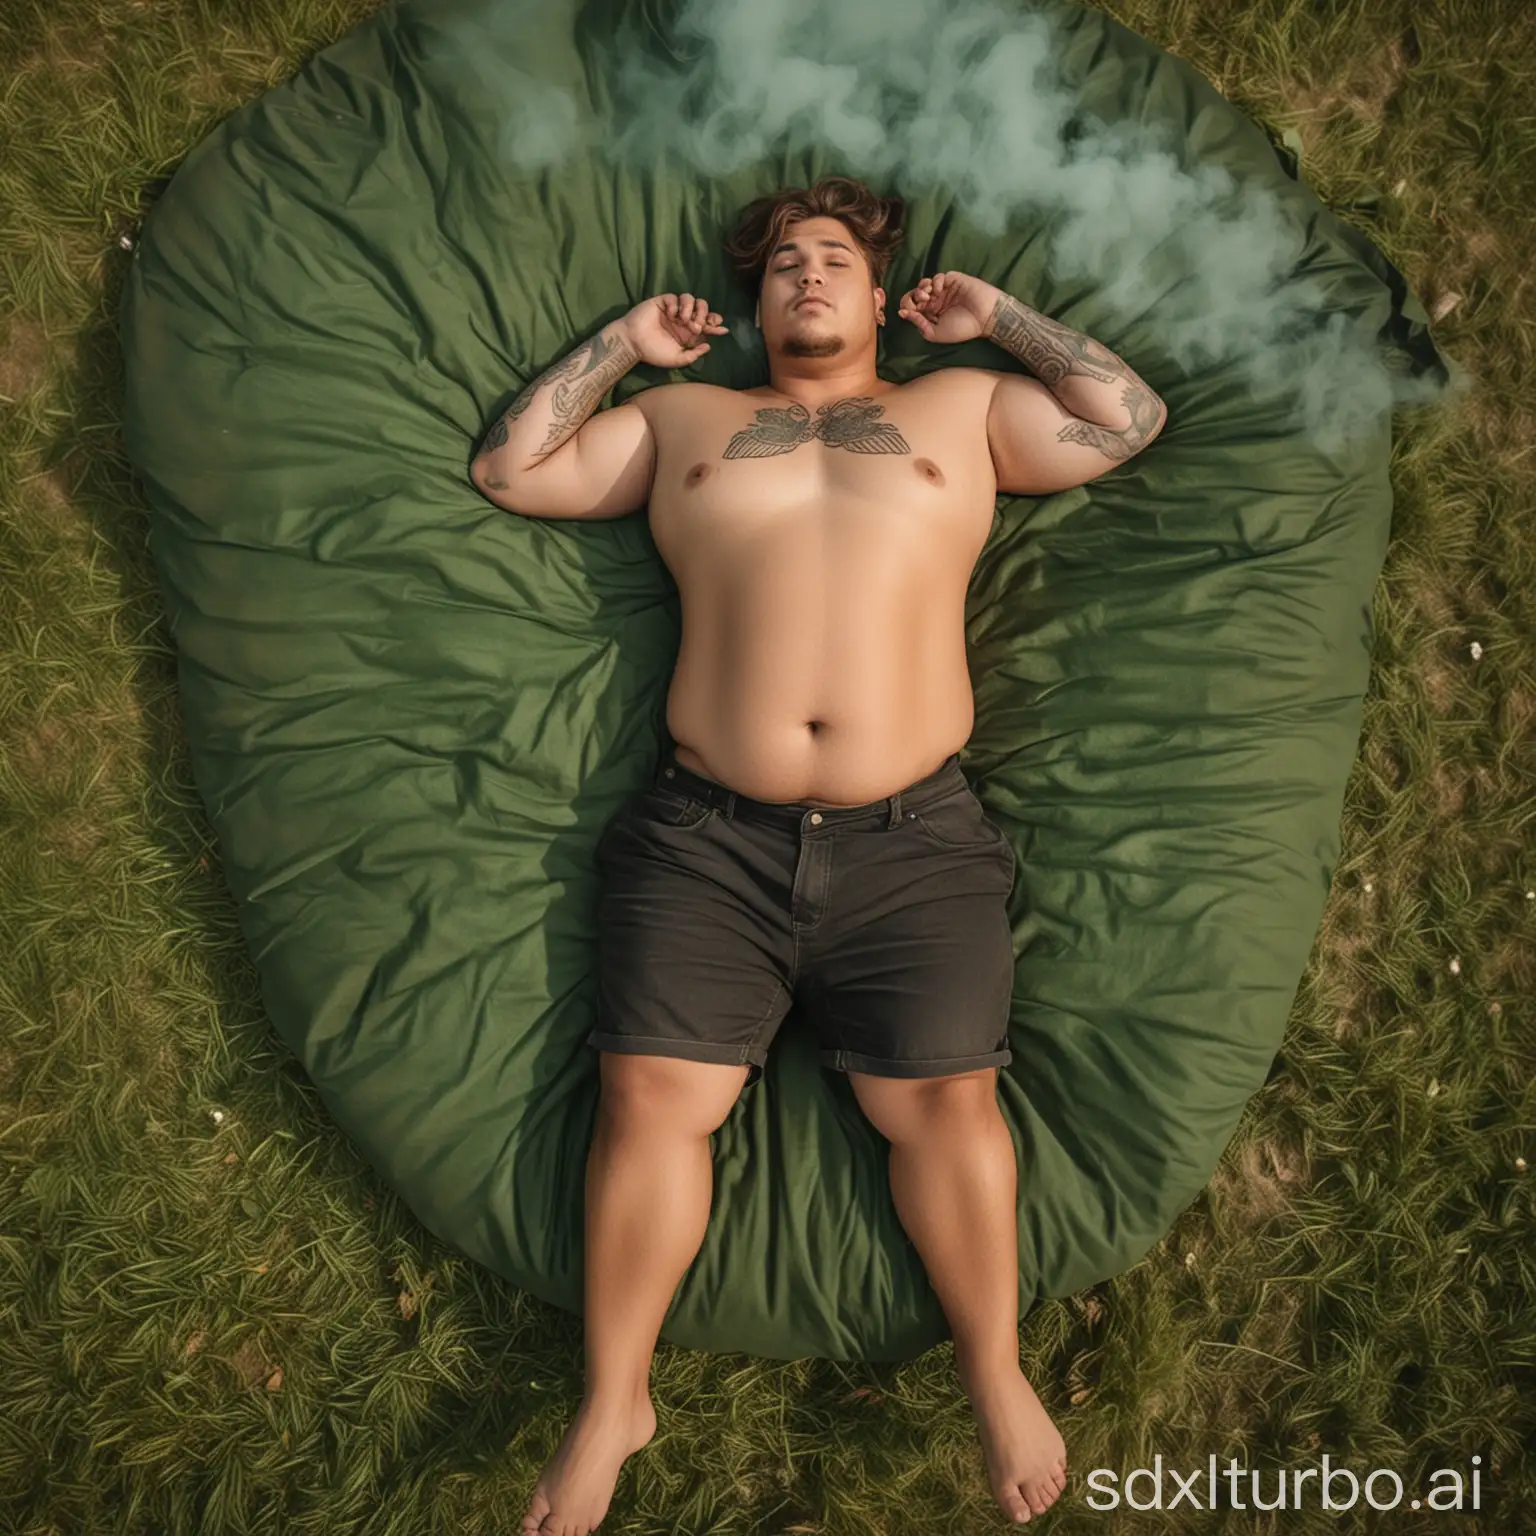 a tall handsome chubby tanned and young man, brown mullet hair, big belly, with mini tattoes, spreading green smoke on behind, lying on the grass floor, sensual posing, on a obscure environment tent, concept art style